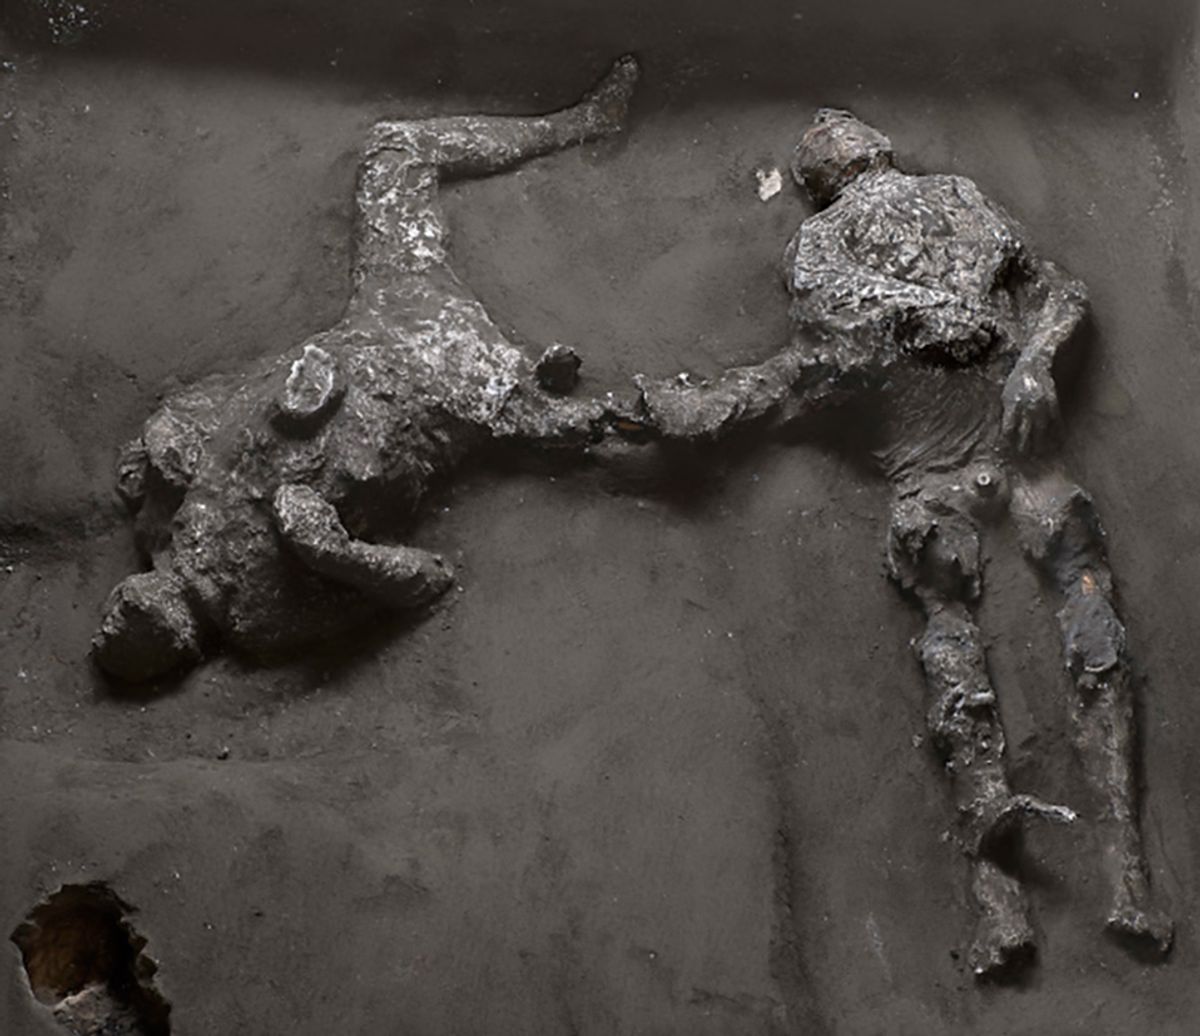 The men—who were were discovered during excavations at the Civita Giuliana, a suburban villa northwest of Pompeii—were identified as a wealthy landowner and his slave Courtesy of the Archaeological Park of Pompeii. Photo: Luigi Spina